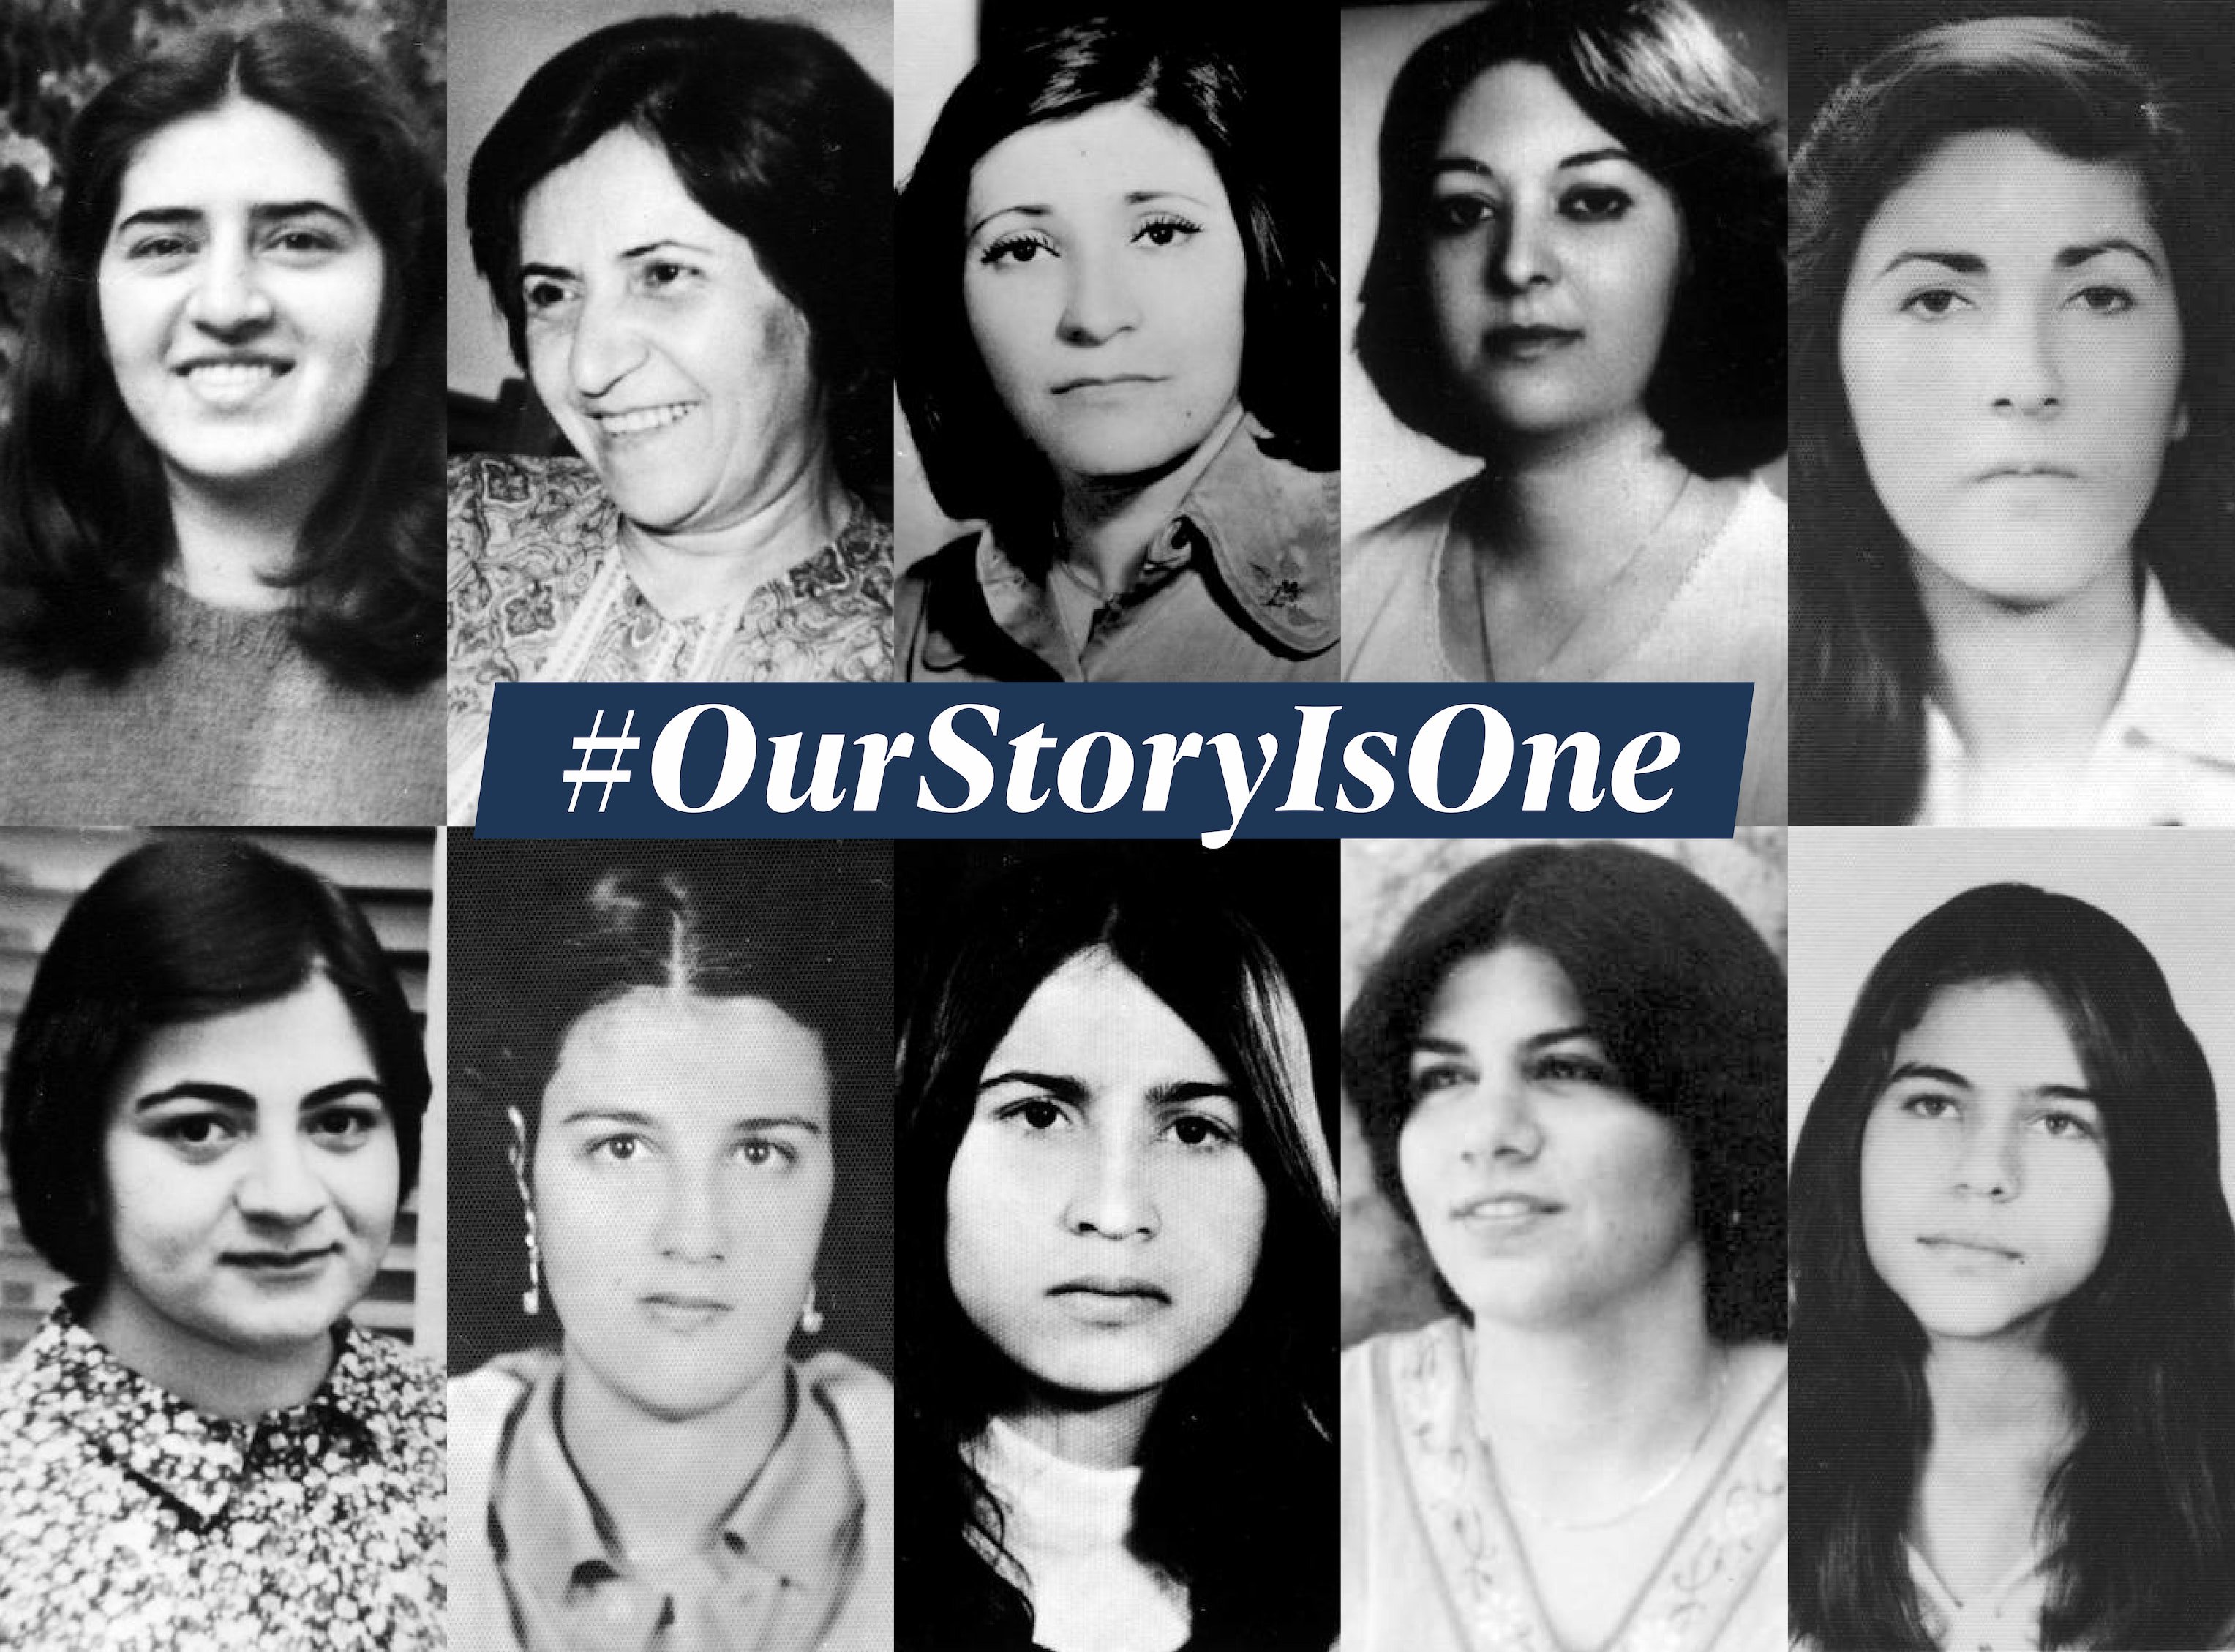 Ten Baha I Women Executed Together 40 Years Ago Global Campaign Honors Them In Support Of